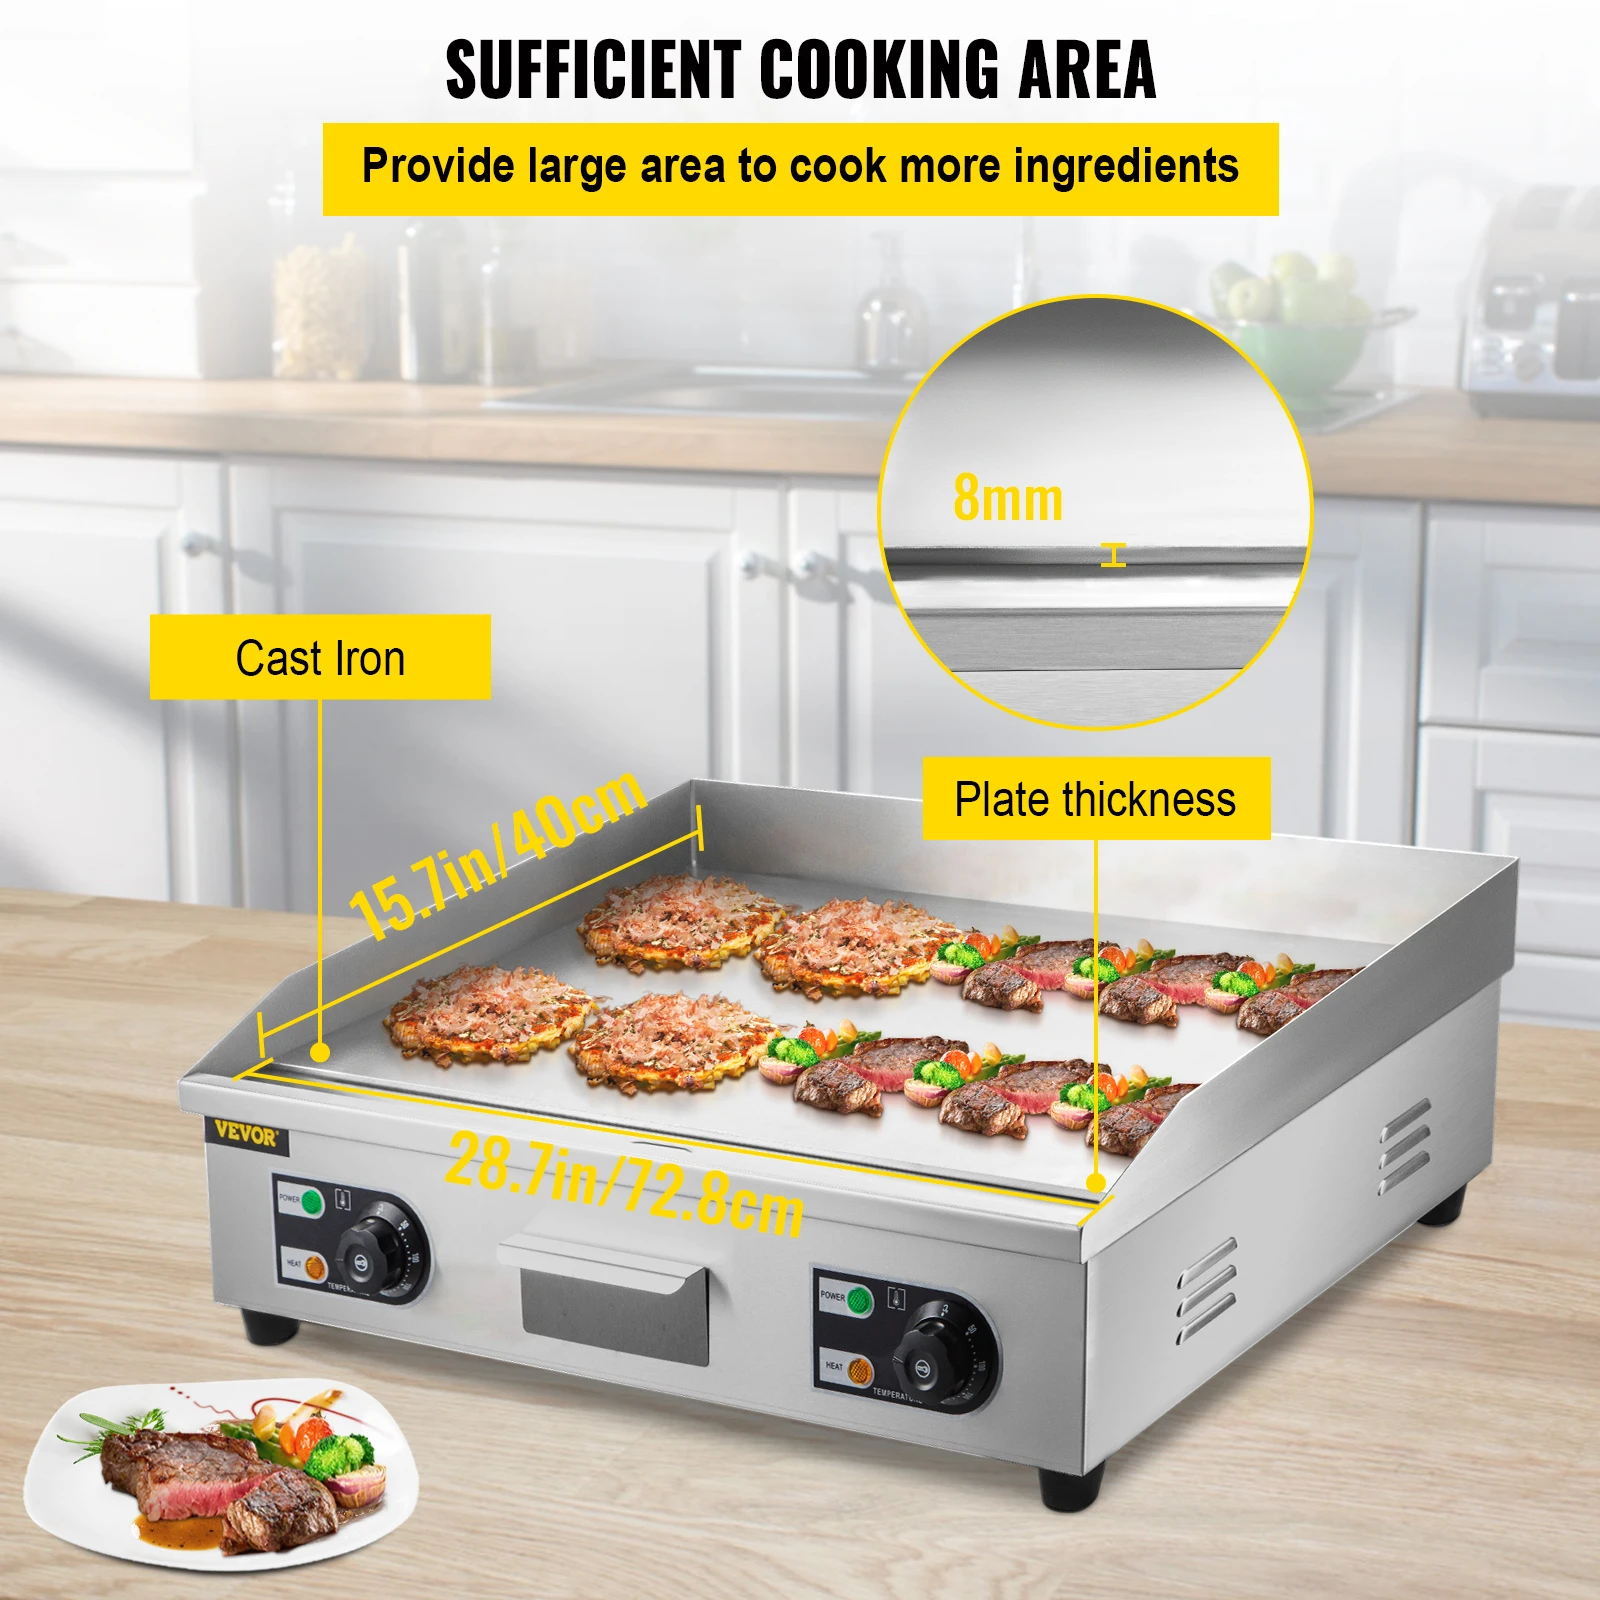 Commercial Griddle 4400W 110V Commercial Electric Countertop Griddle Stainless Steel Flat Top Grill Hot Plate BBQ 50°C to 300°C Adjustable Easy Clean 